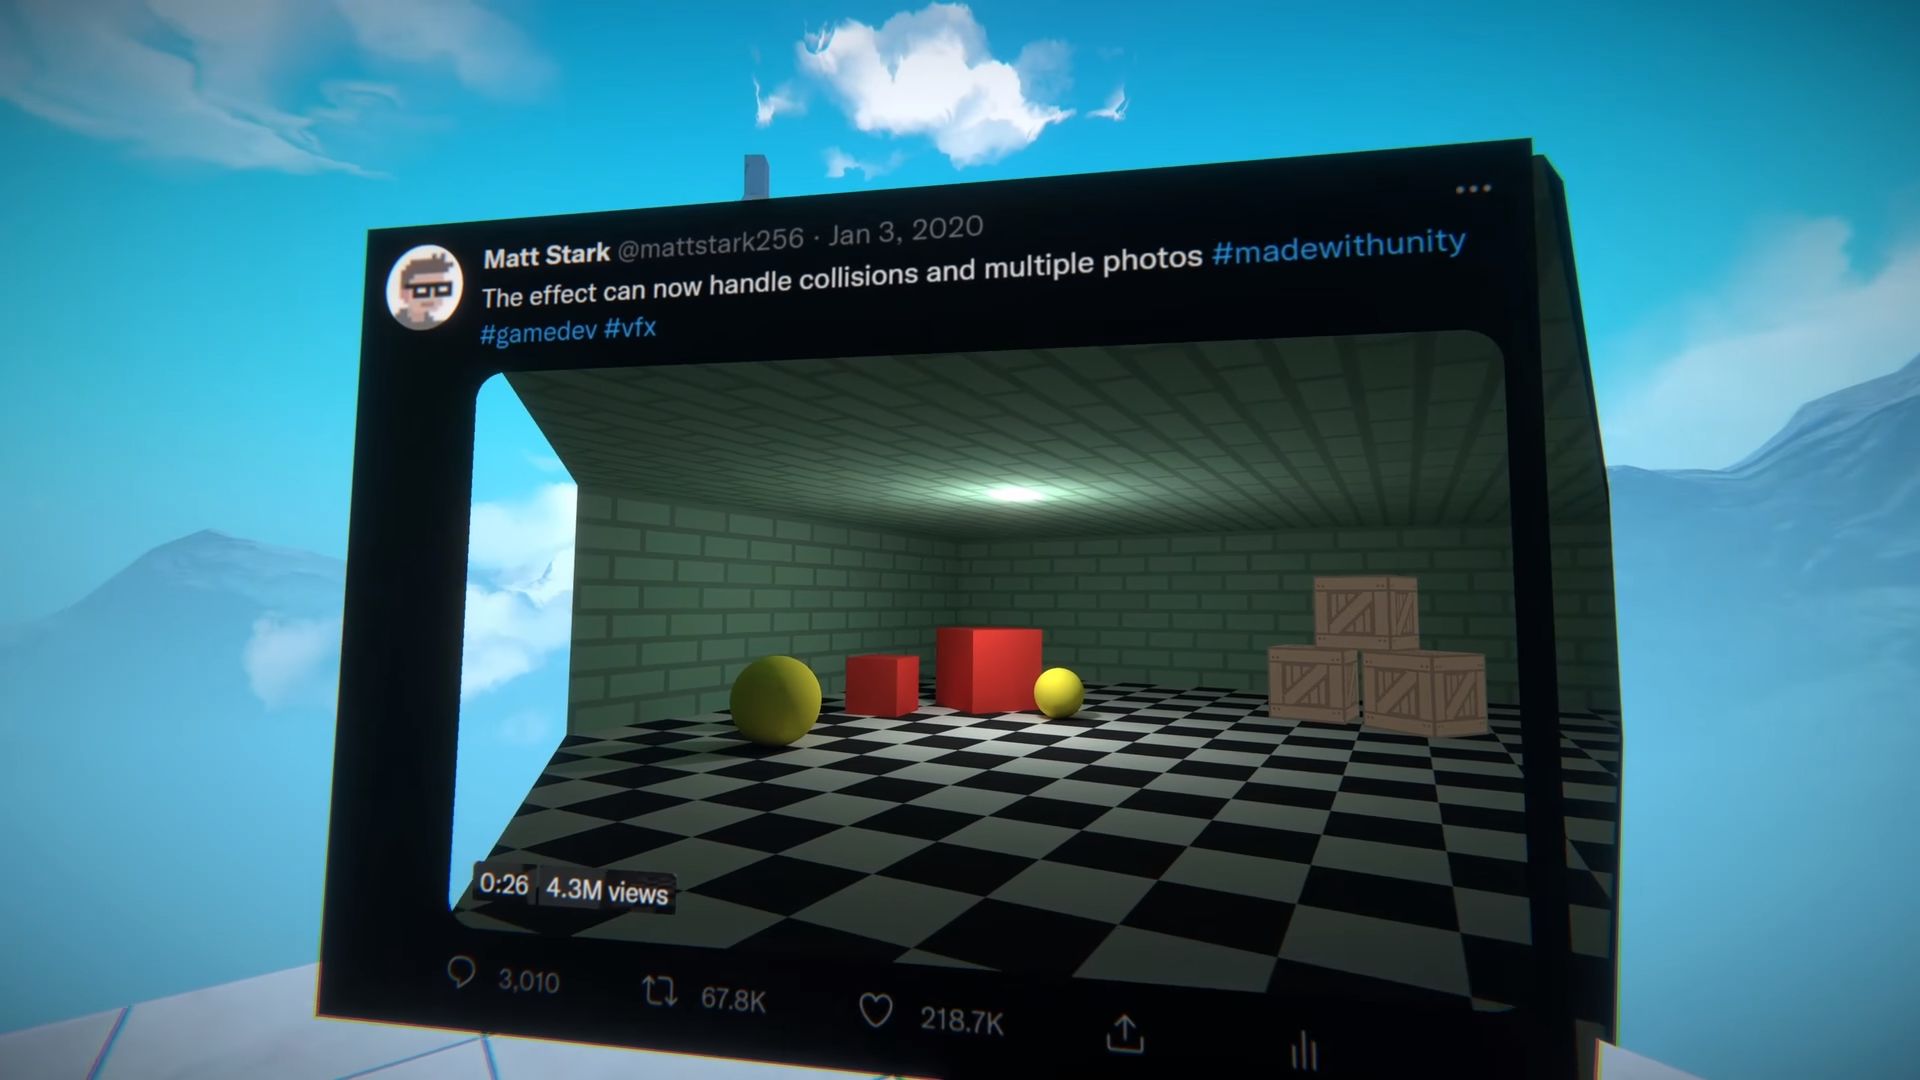 Viewfinder draws inspiration from Portal to blend puzzles with story